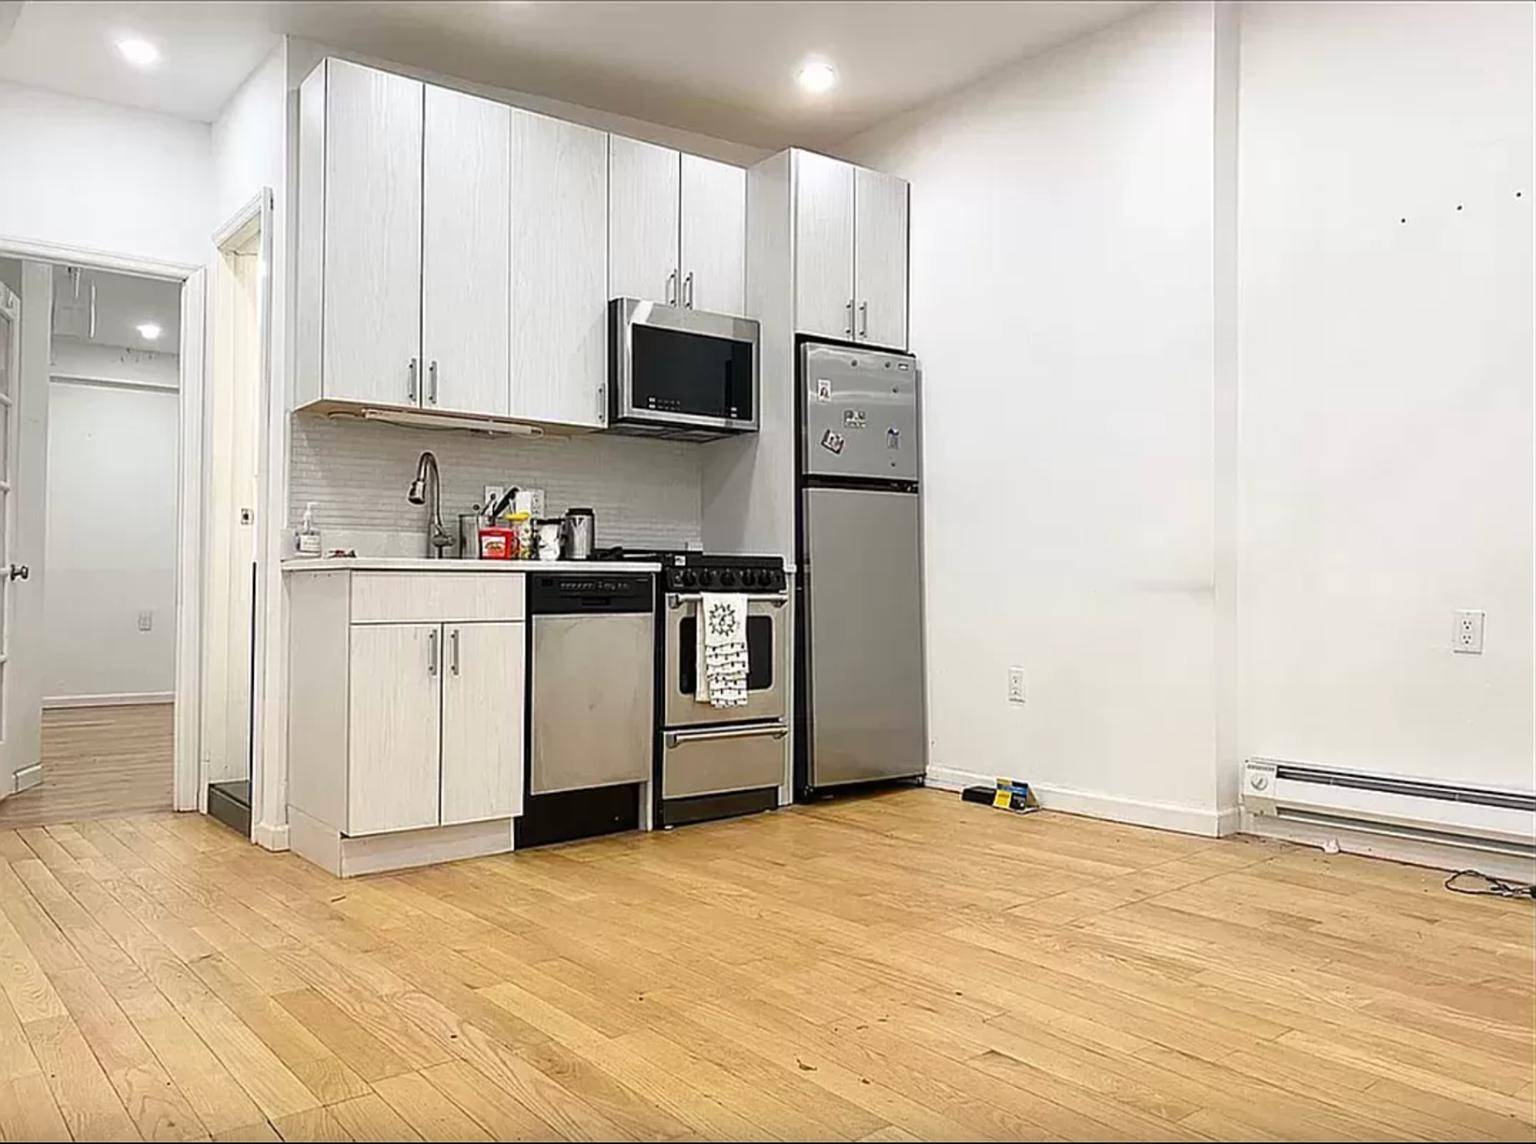 INQUIRE FOR A VIDEOAVAILABLE STARTING JUNE 1Come see this beautiful two bedroom, one bathroom apartment in a prime Carnegie Hill location !